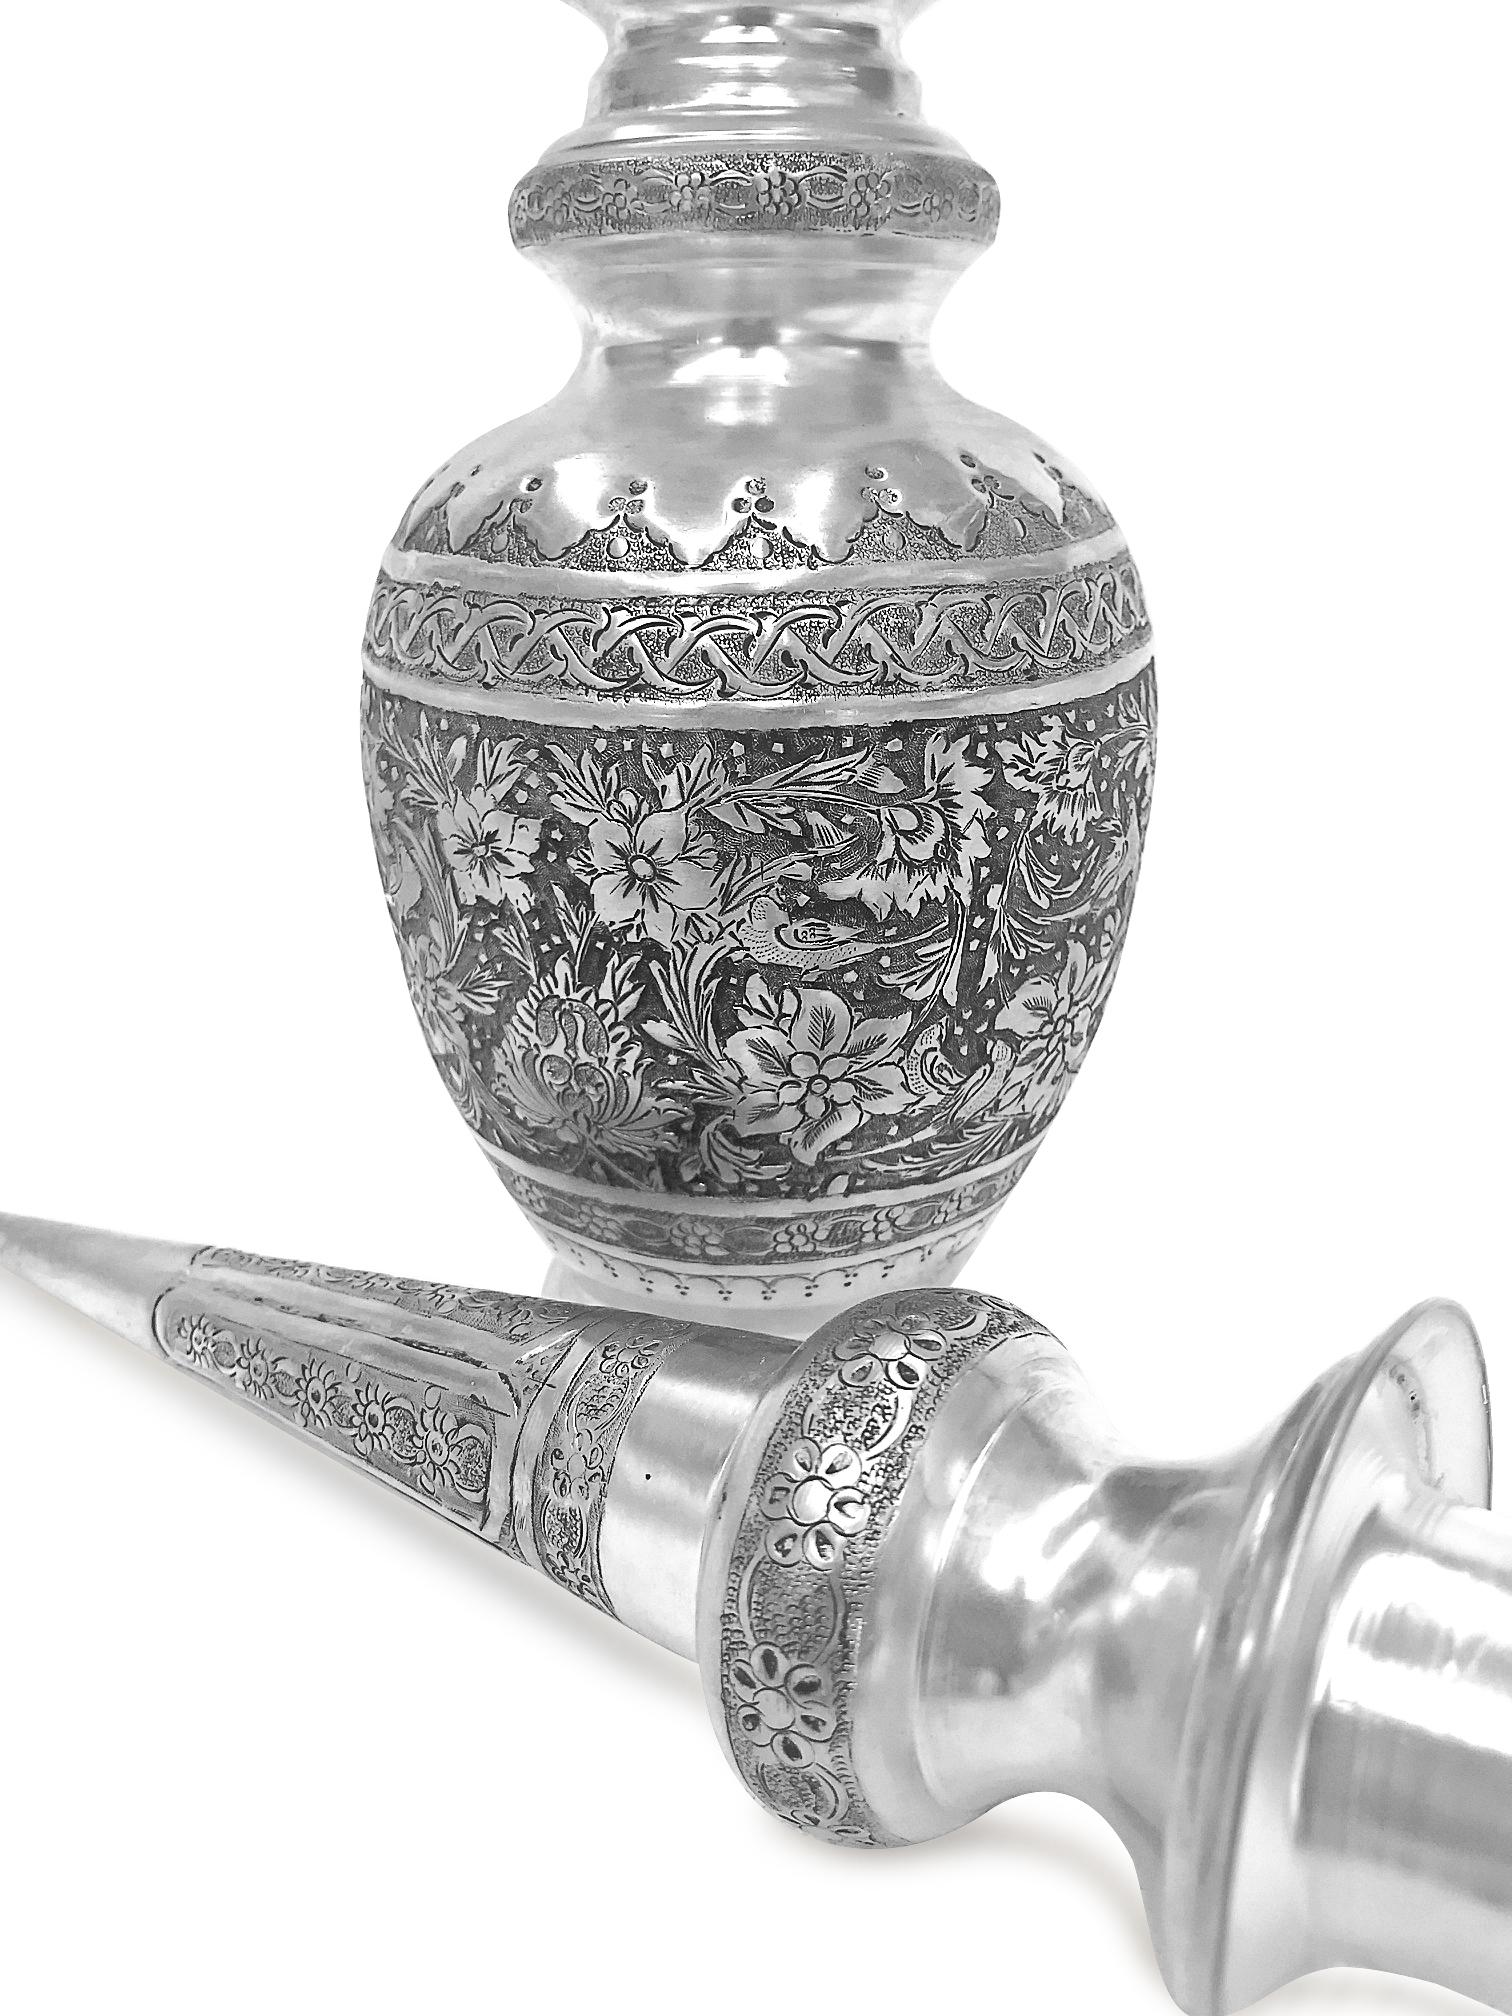 Absolutely beautiful hand made silver wine set. This pair has birds and flowers design. The wine jar set is 0.84 karat silver , could be used for wine or other drinks or just a beautiful decoration piece.
The cover of the jar has a sharp and tall